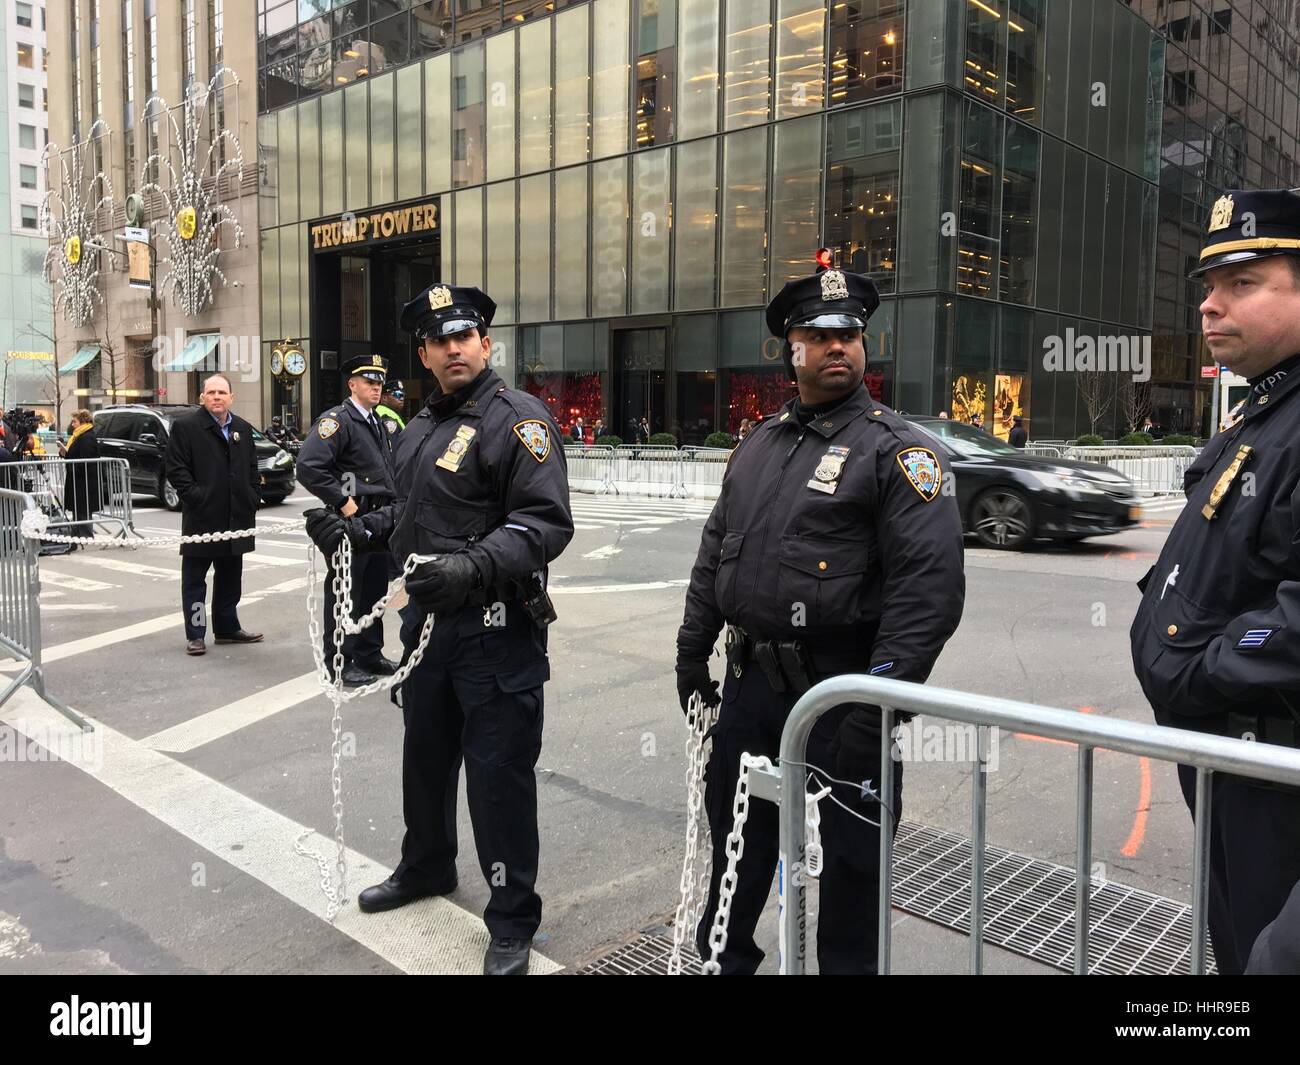 New York, NY, USA. 20th Jan, 2017. New York Police Department (NYPD) officers stand guard ready to cordon off street with chains as people protest in front of Trump Tower on the Inauguration Day on which Donald Trump took office as the 45th President of the United in New York, New York on January 20, 2017. Credit: Rainmaker Photo/Media Punch/Alamy Live News Stock Photo